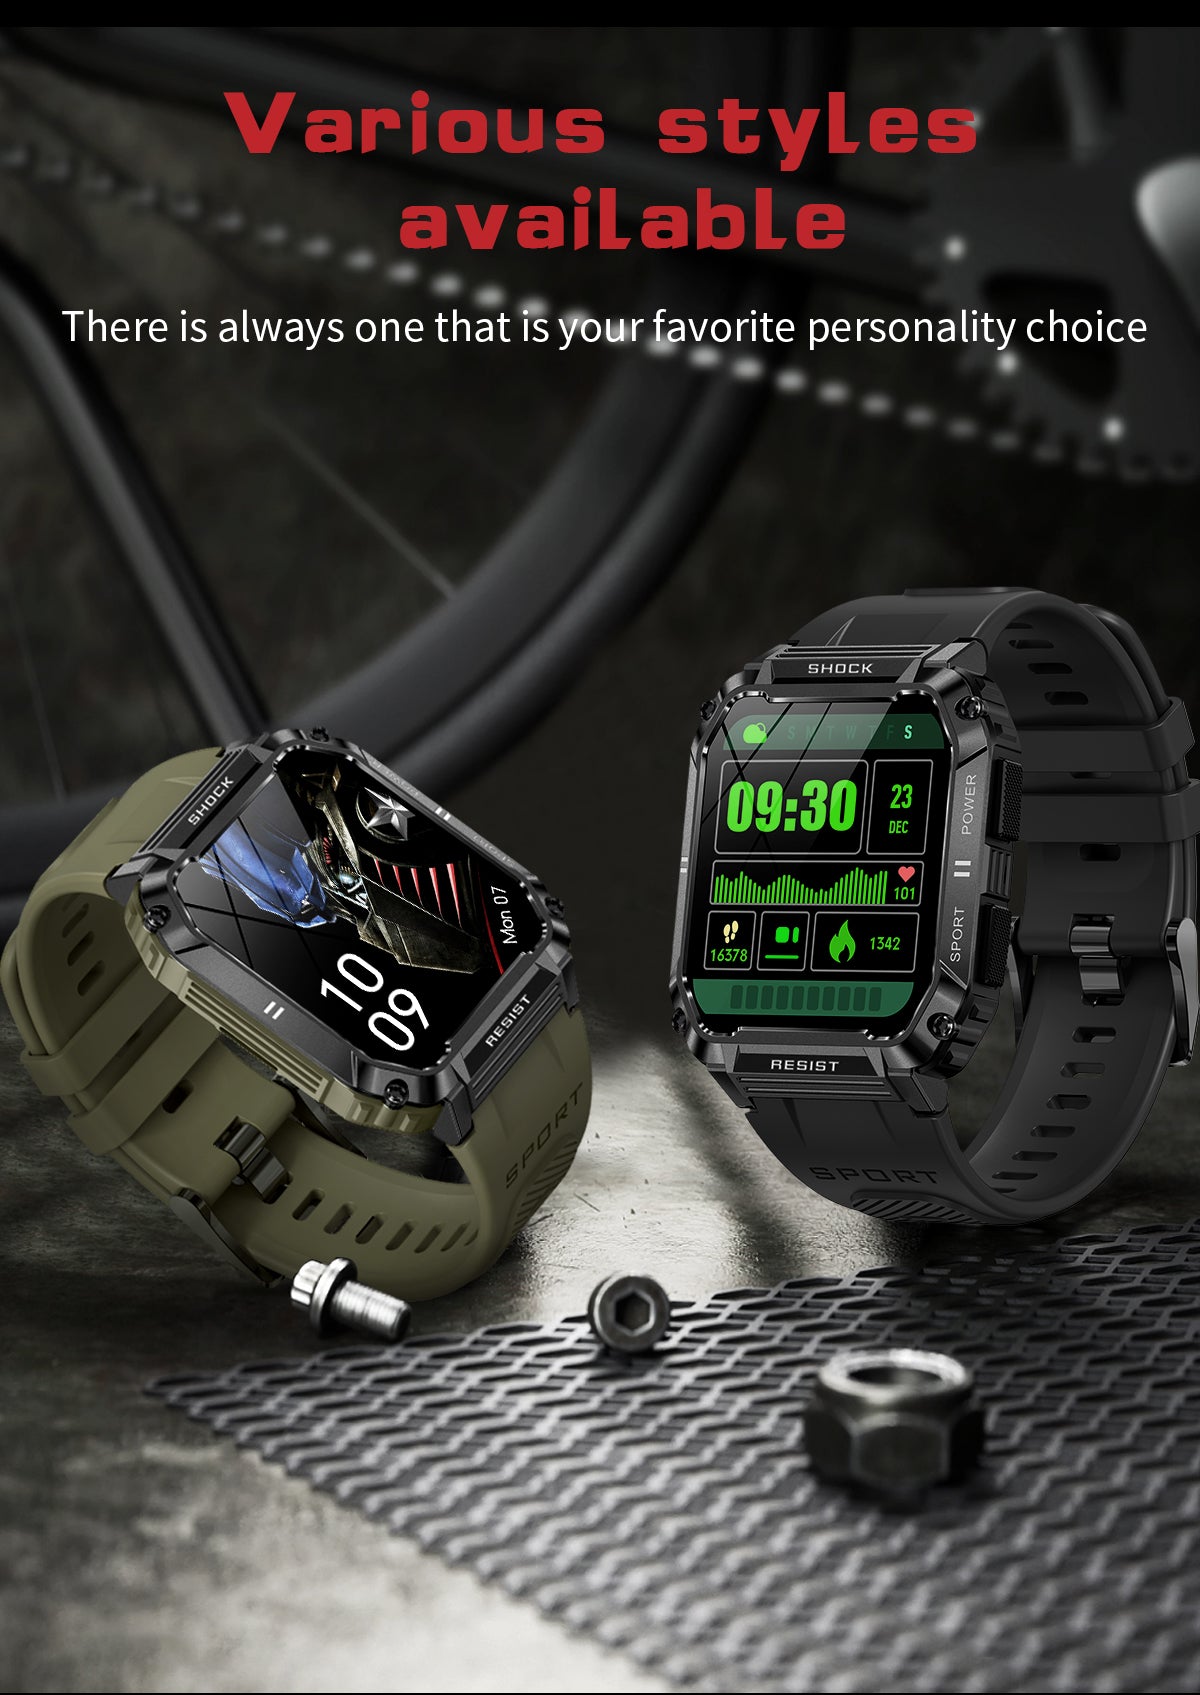 rugged smart watches for men android compatible